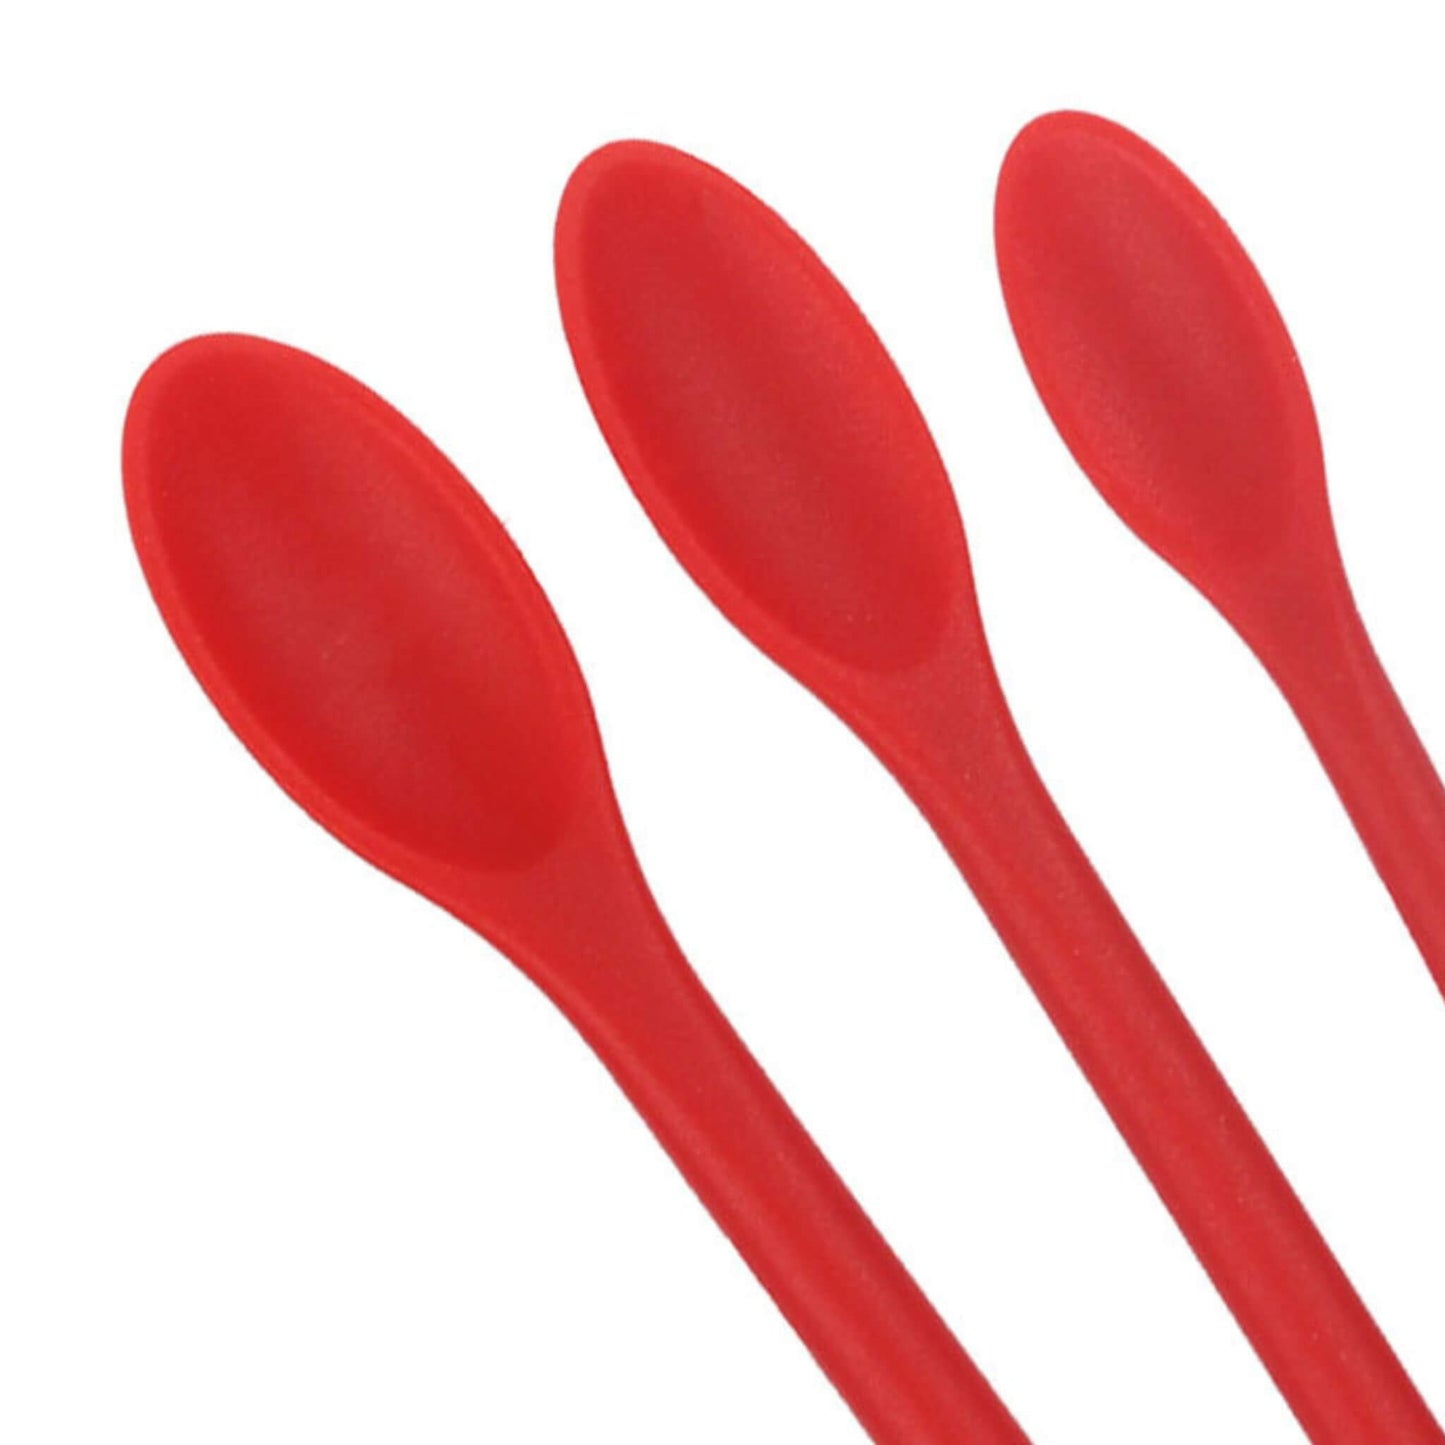 set of 3 jar spatula scrapers in red with spoon end